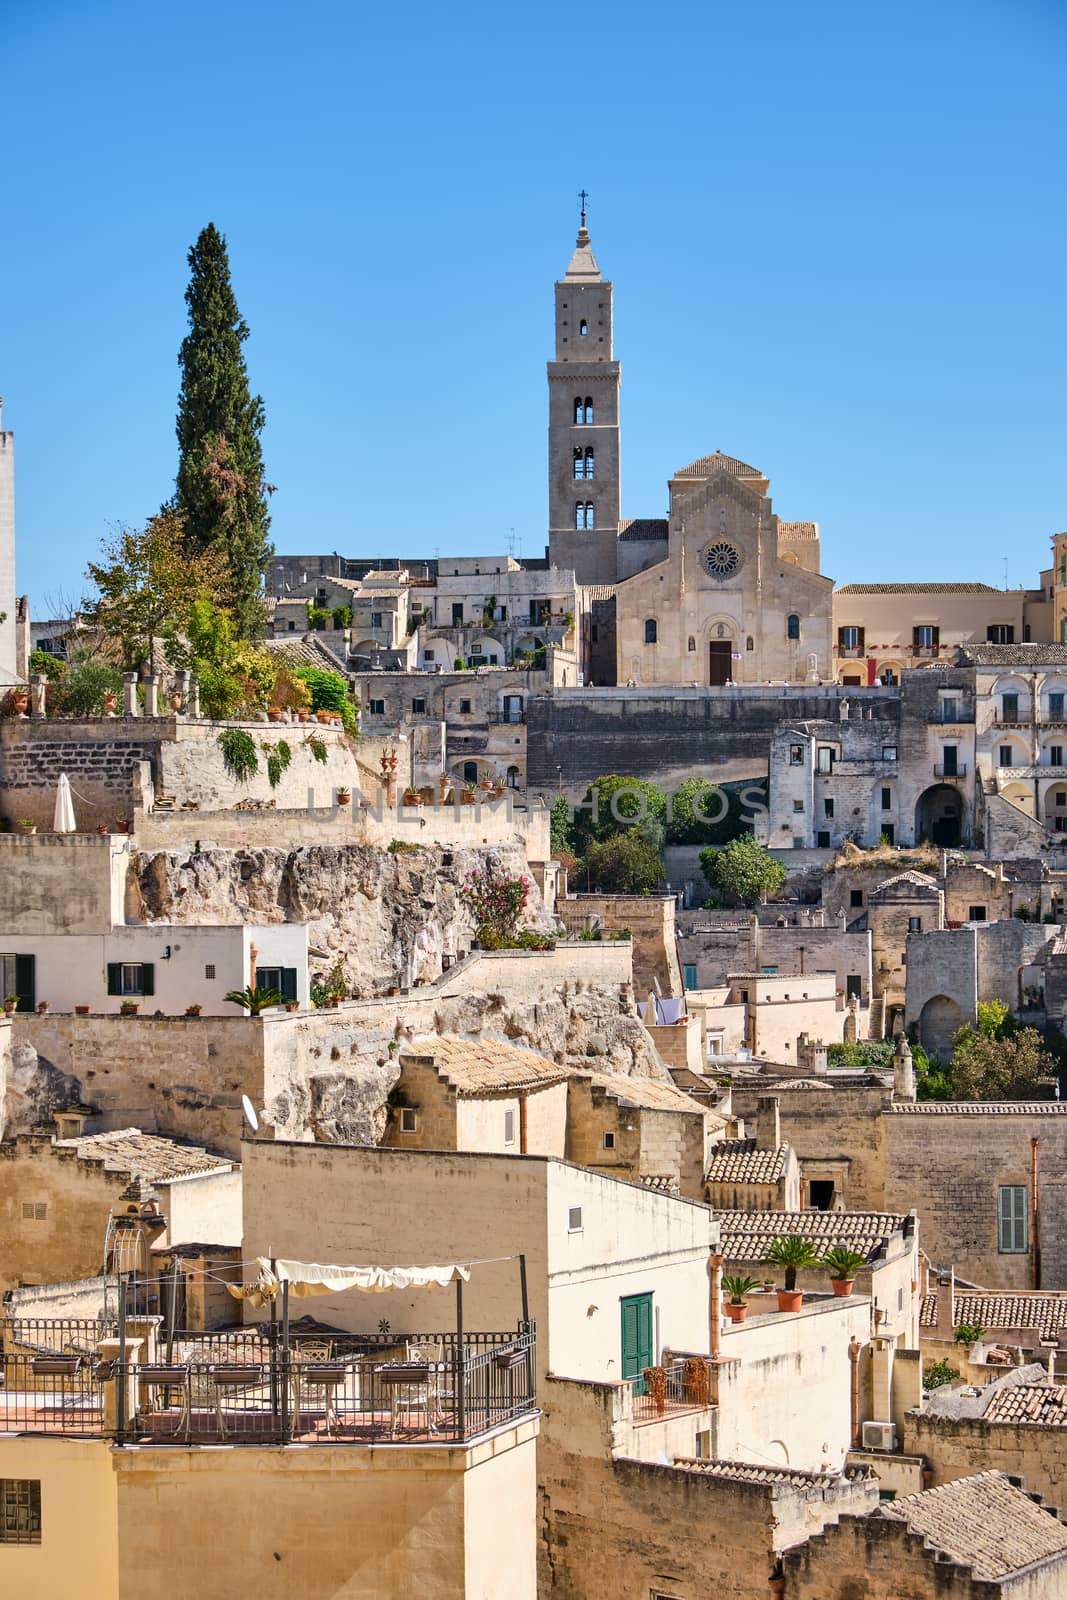 The old town of Matera in Italy by elxeneize